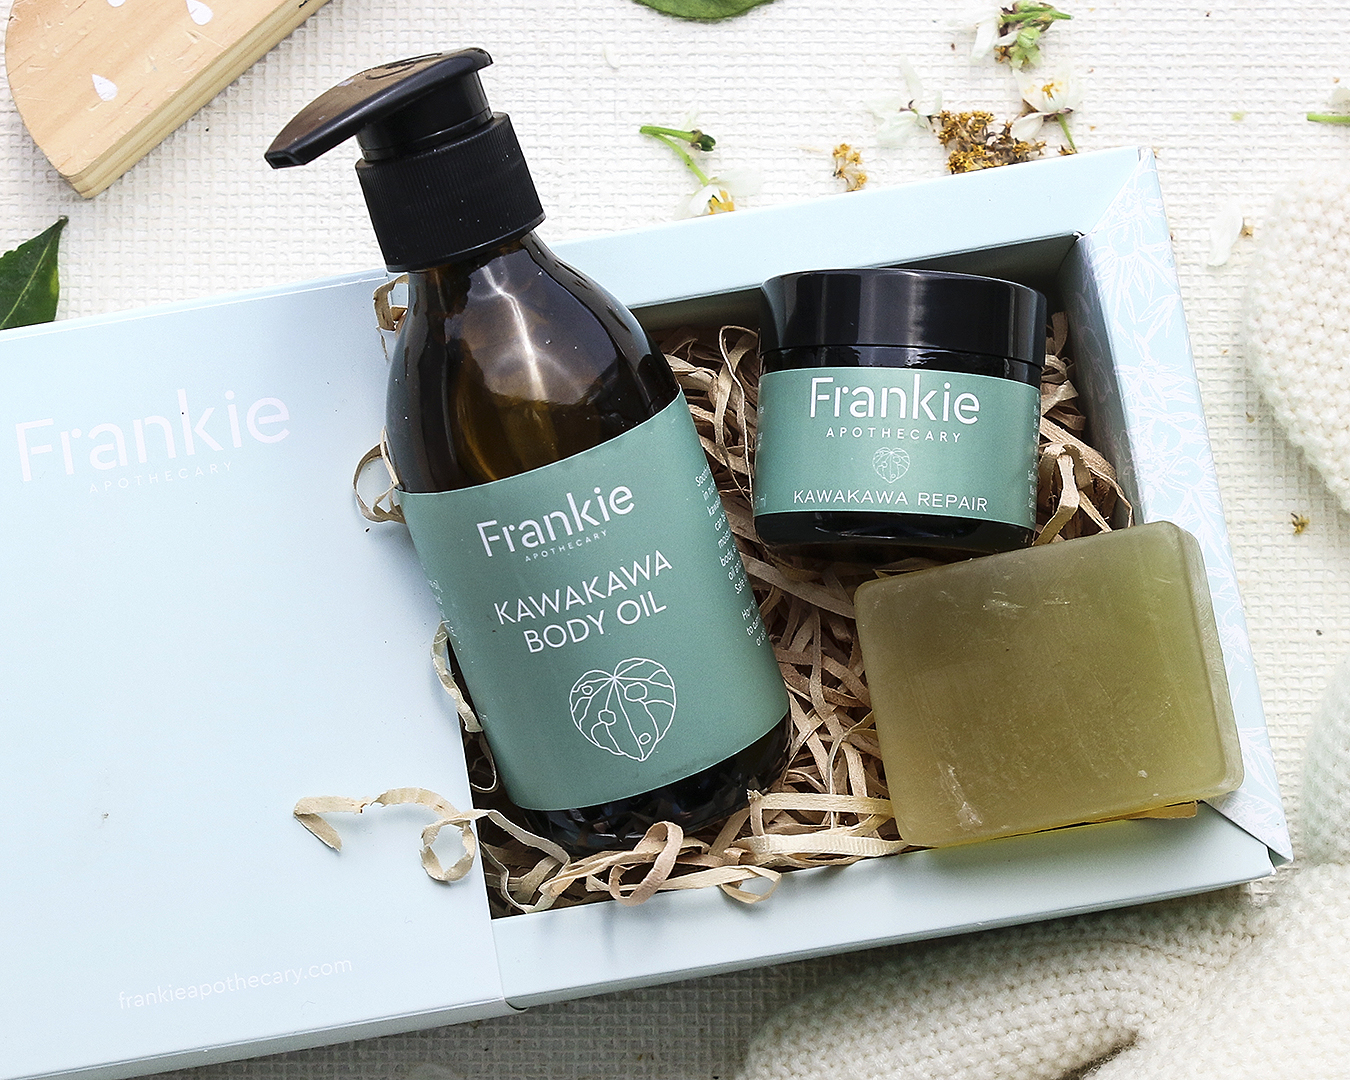 A lovely looking gift box from Frankie Apothecary.